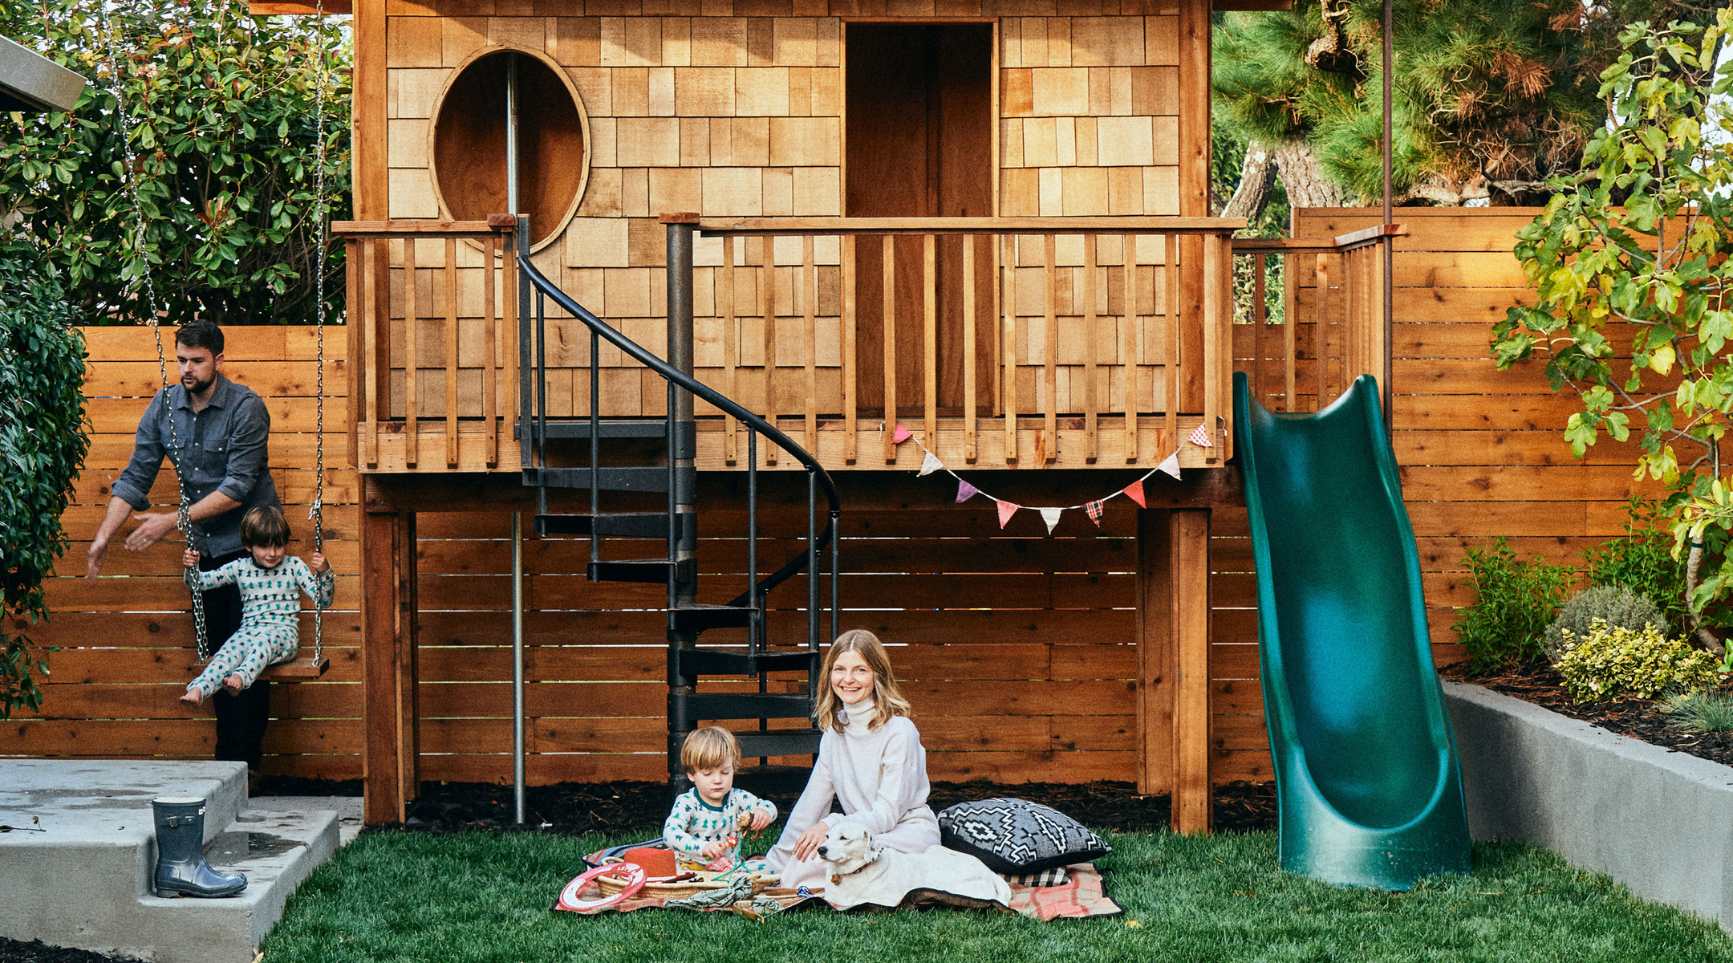 How To Clean Outdoor Playhouse